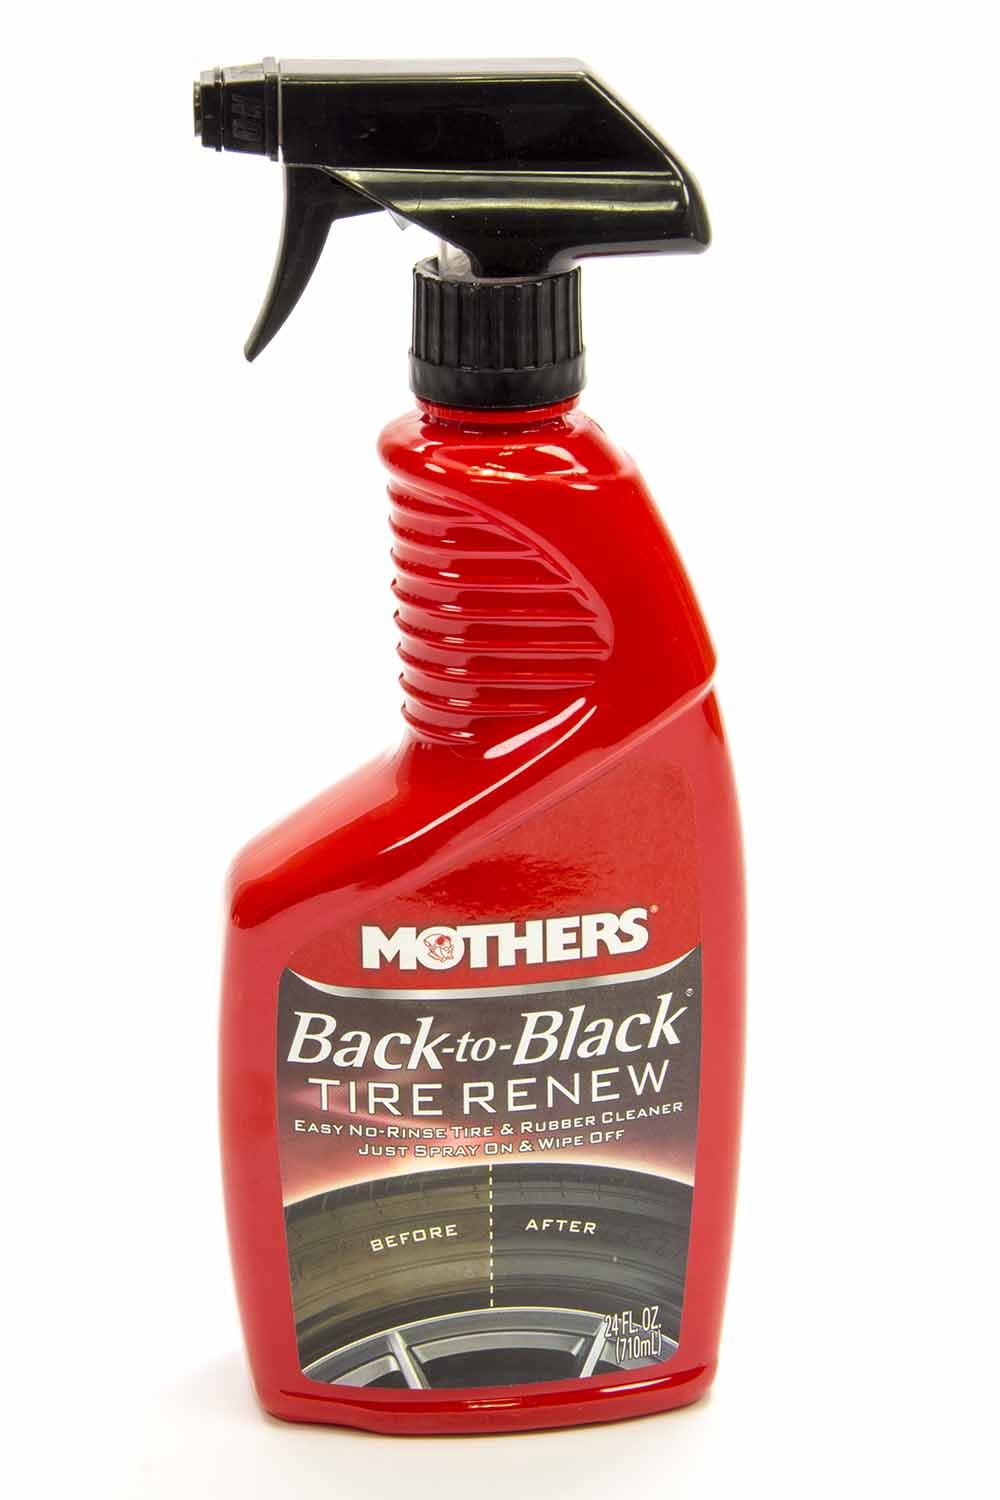 Mothers Back to Black Tire Renew 24oz. MTH09324